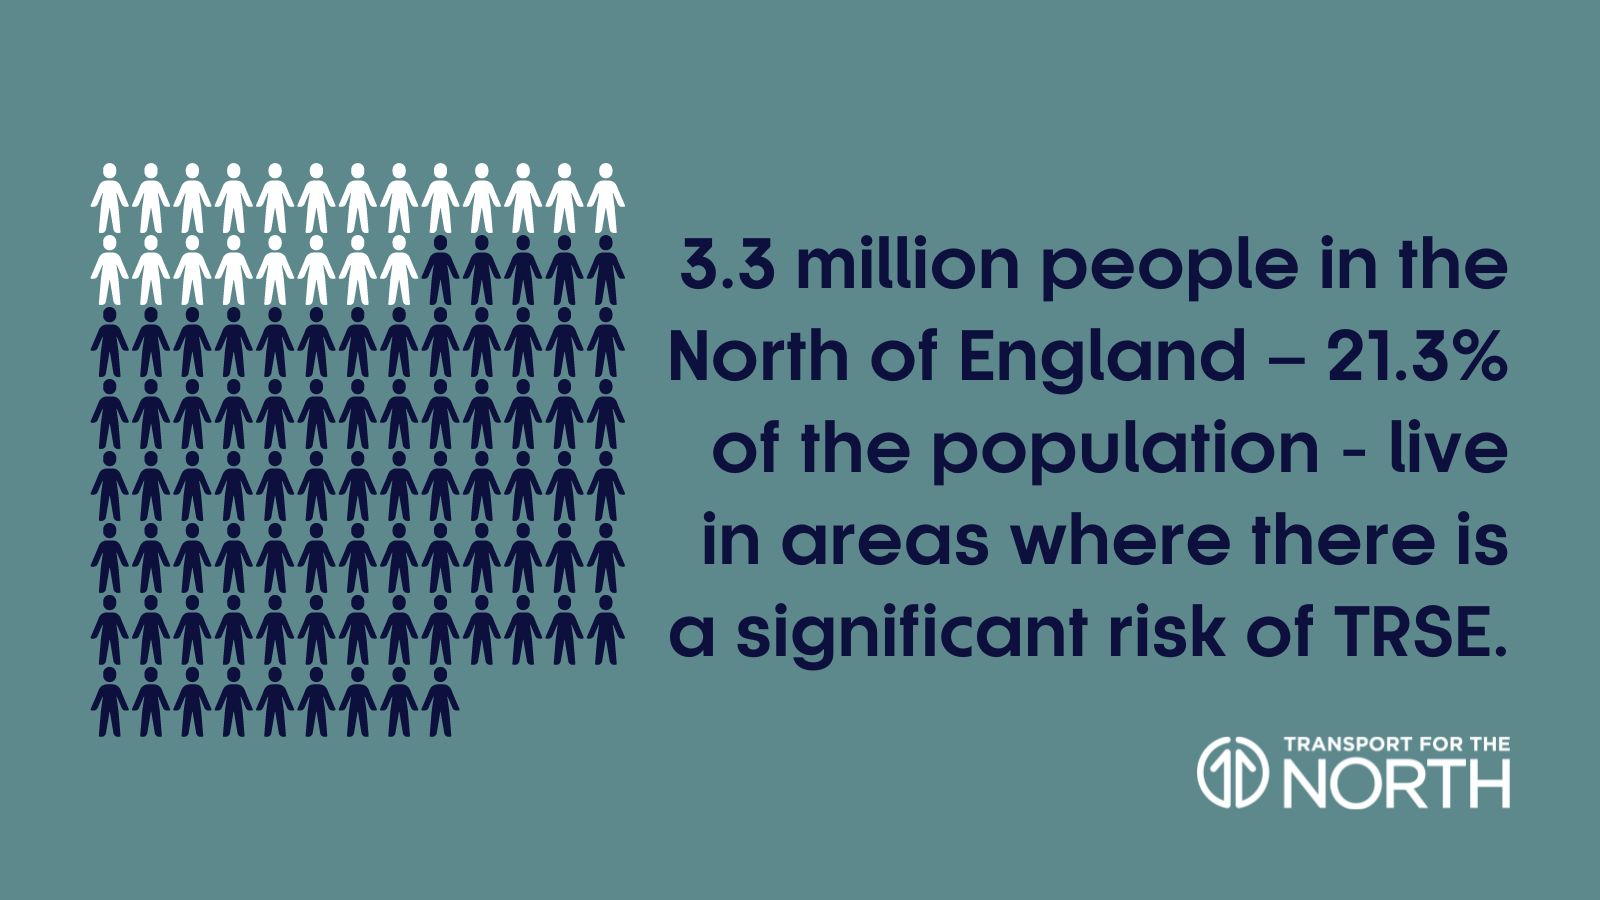 3.3 million people in the North of England live in areas where there is a significant risk of TRSE.